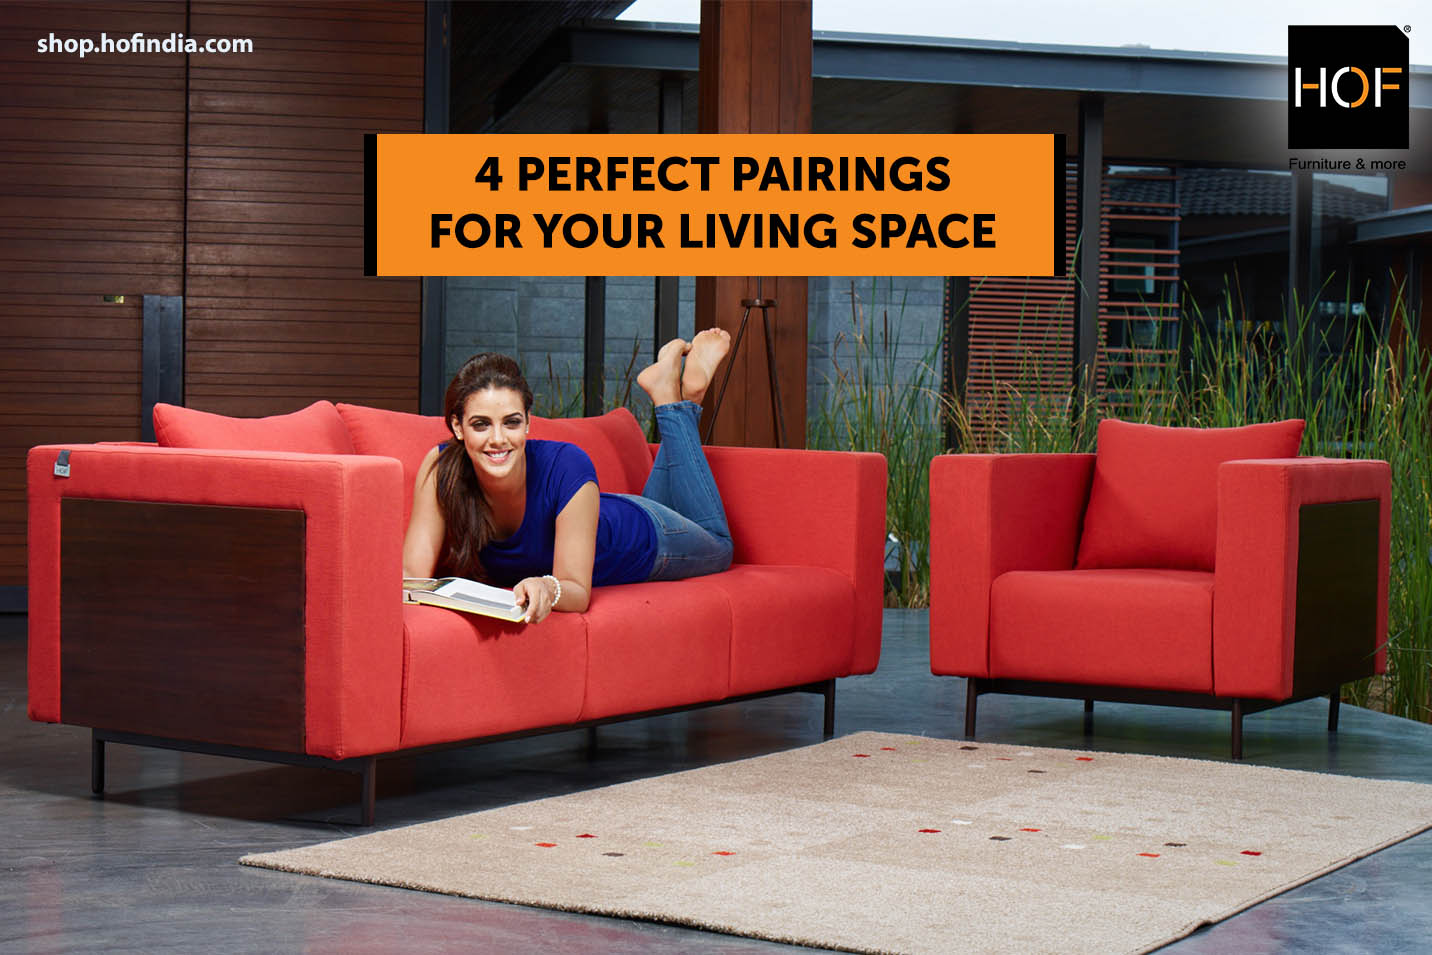 4 perfect pairings for your living space